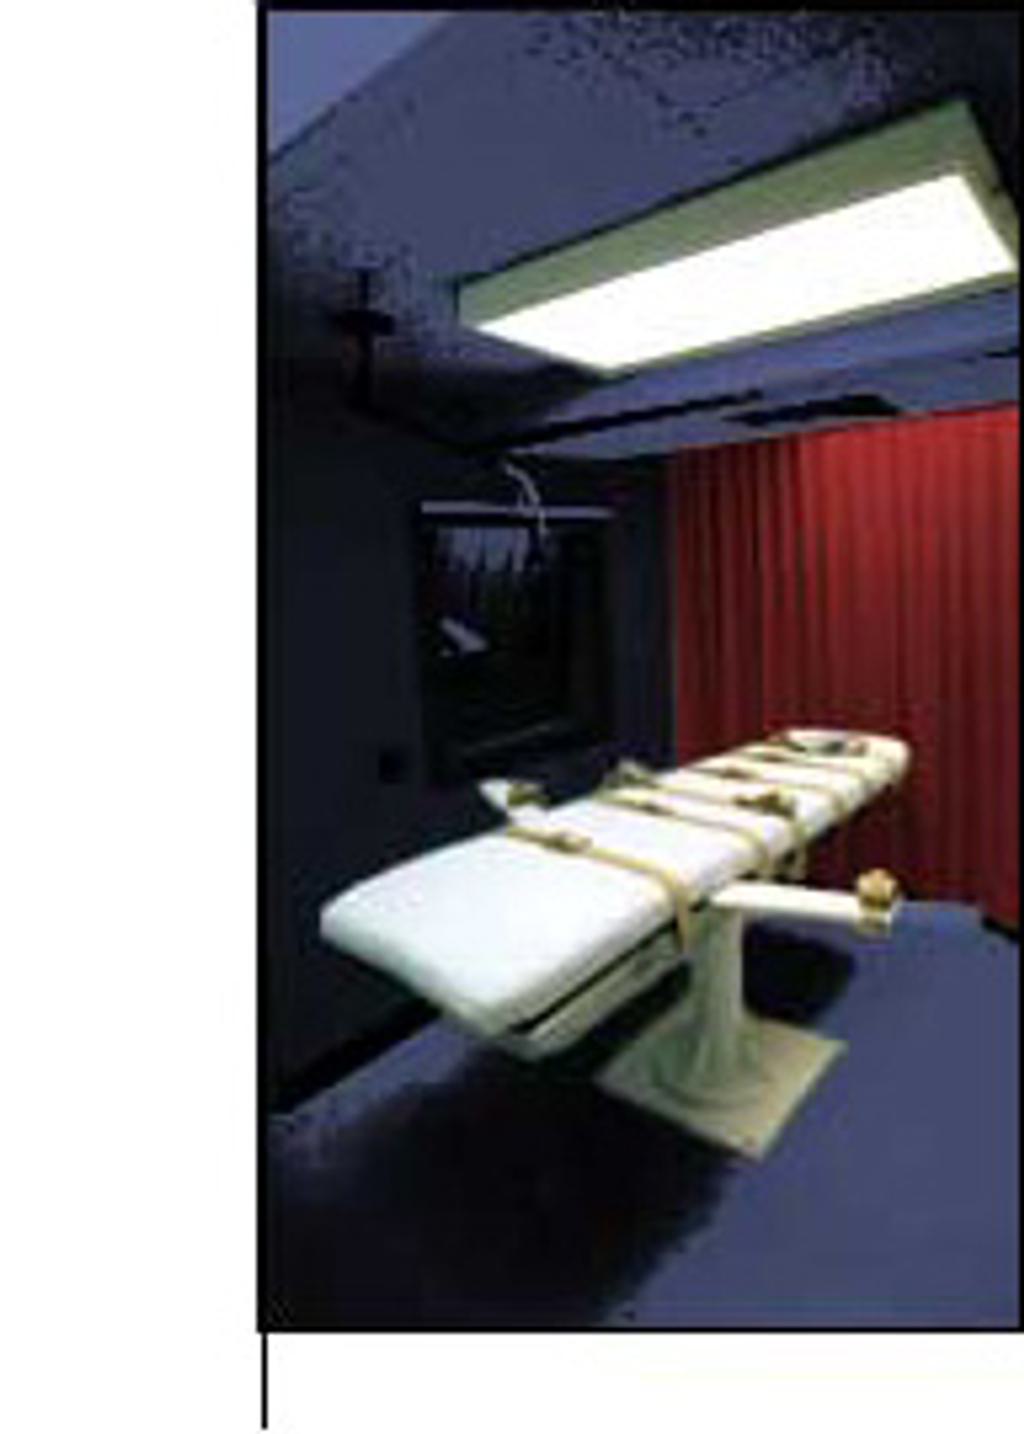 Arkansas Prisons Suspend Search for Execution Drugs, Ask For Even Broader Drug Secrecy Law